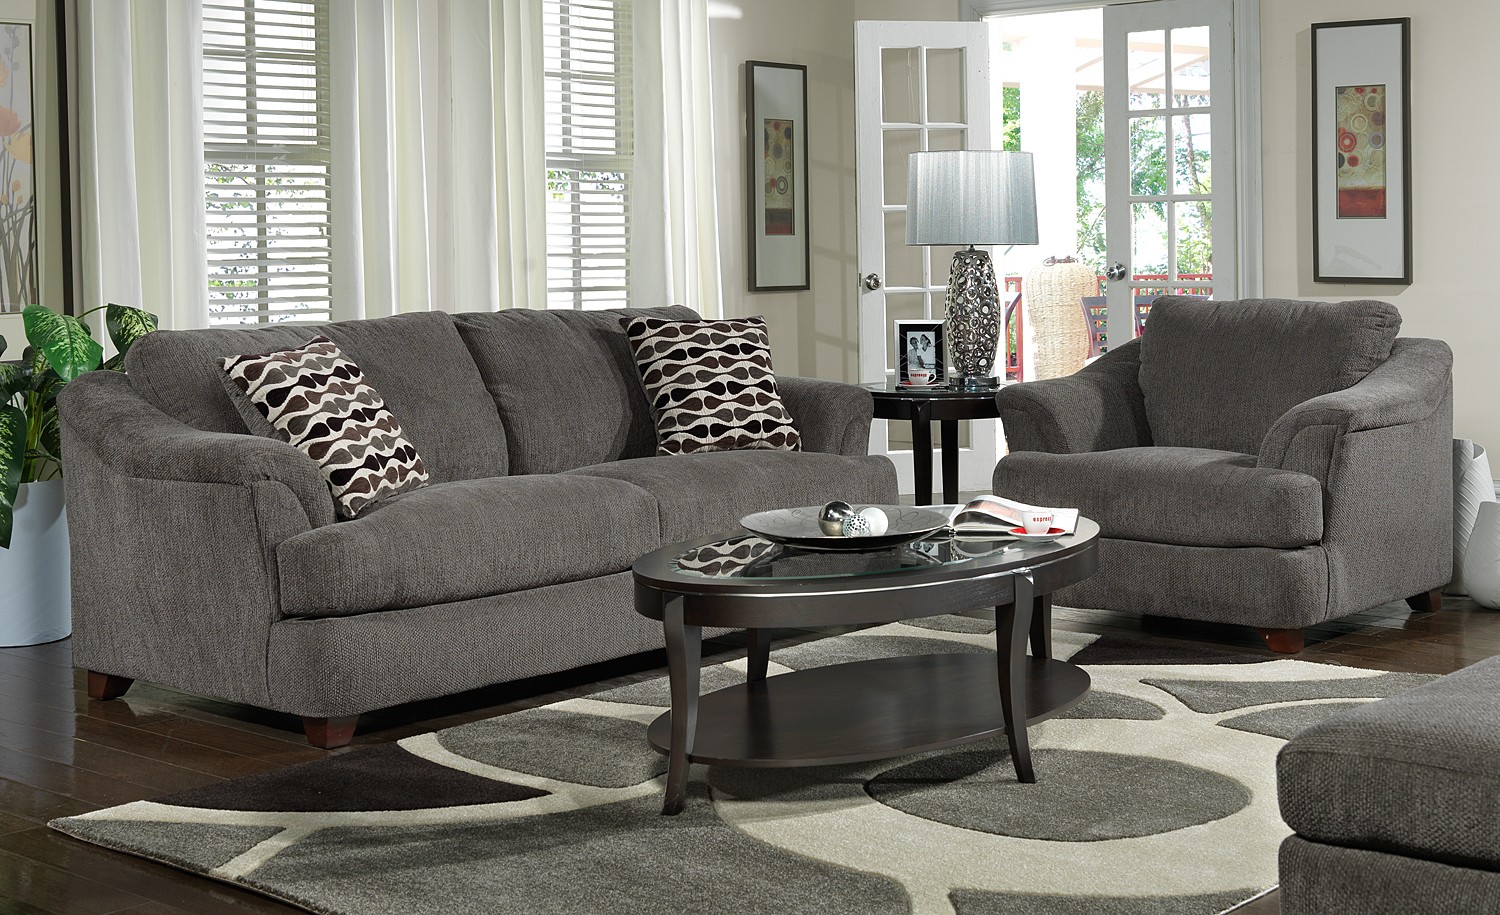 gray living room furniture image from: gray living room sets concept UTUMLSX